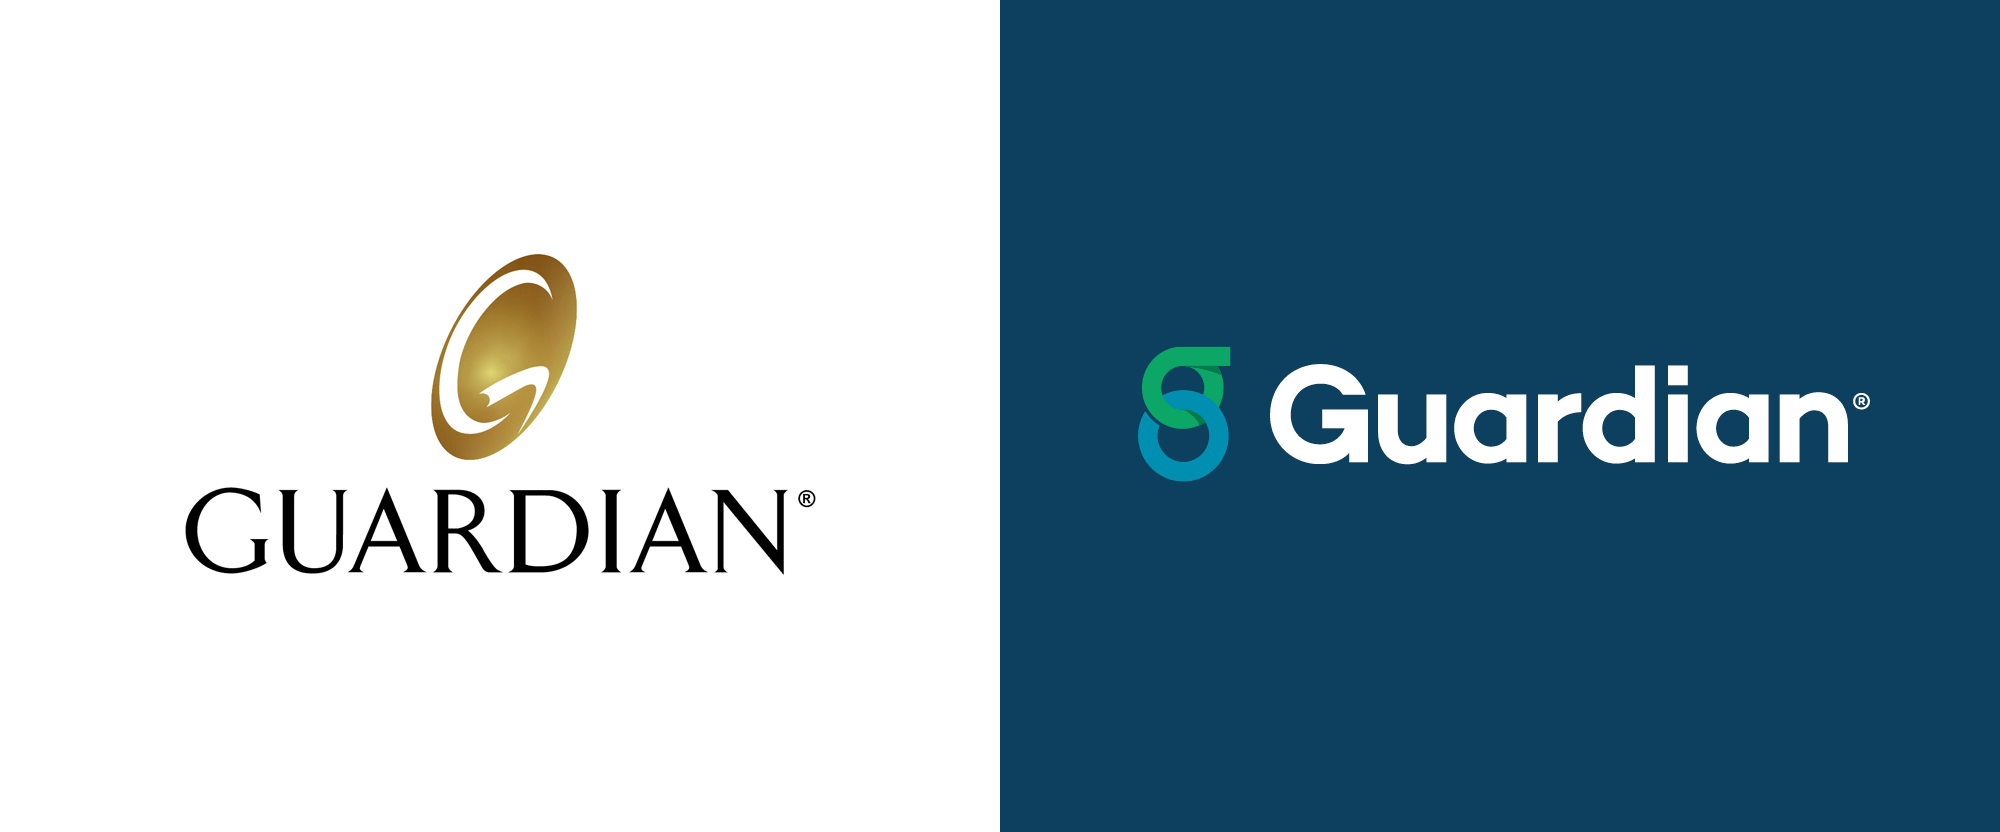 New Logo and Identity for Guardian by The Working Assembly